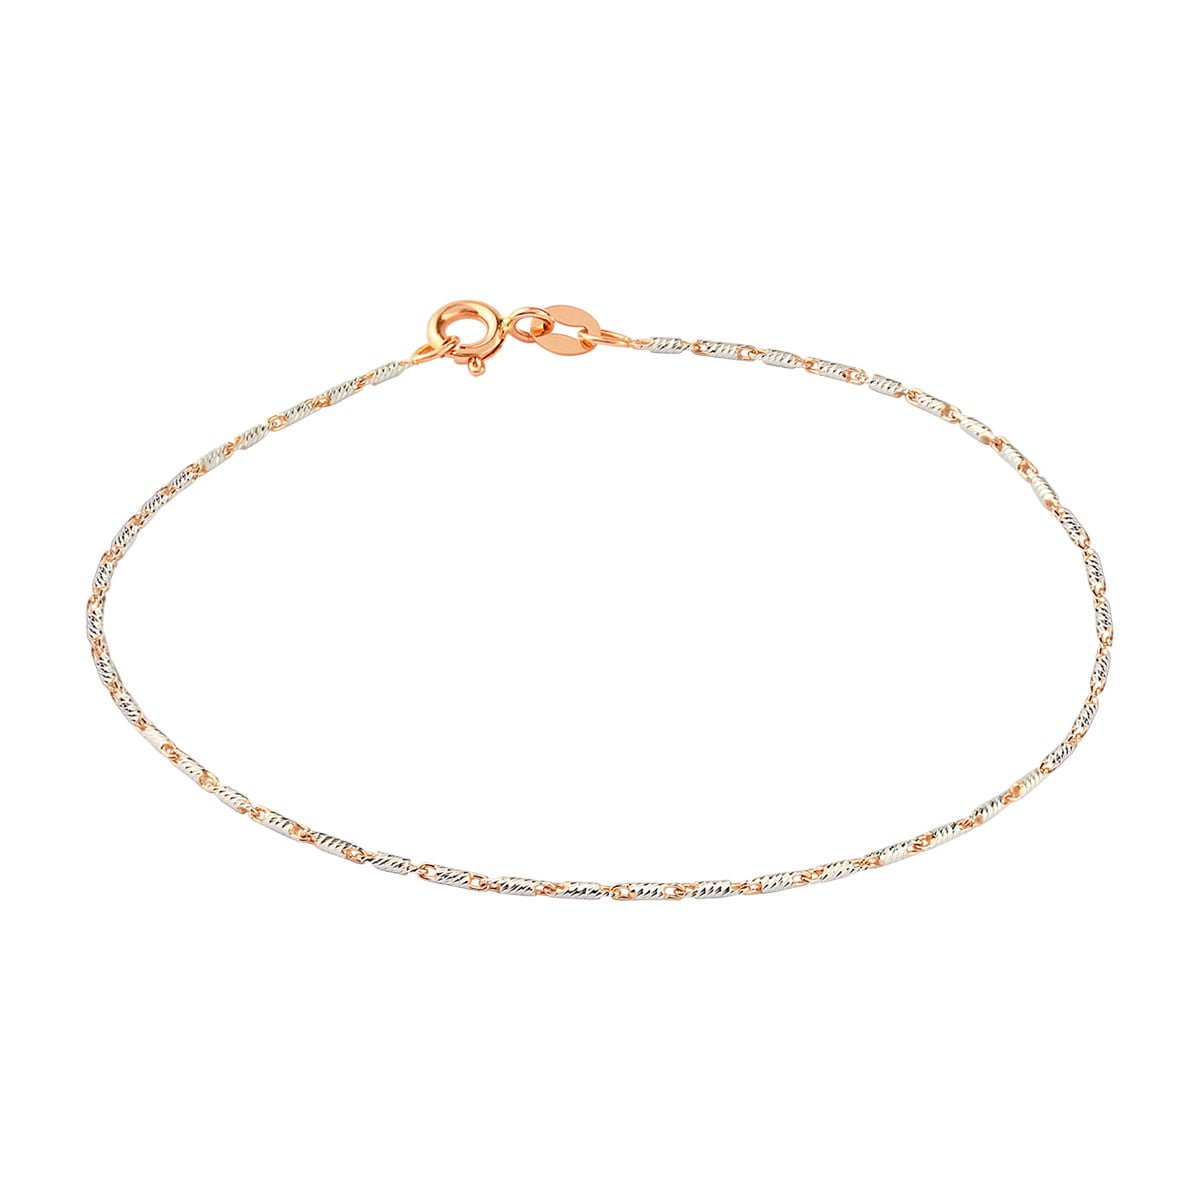 18ct Rose and White Gold Dainty Bracelet